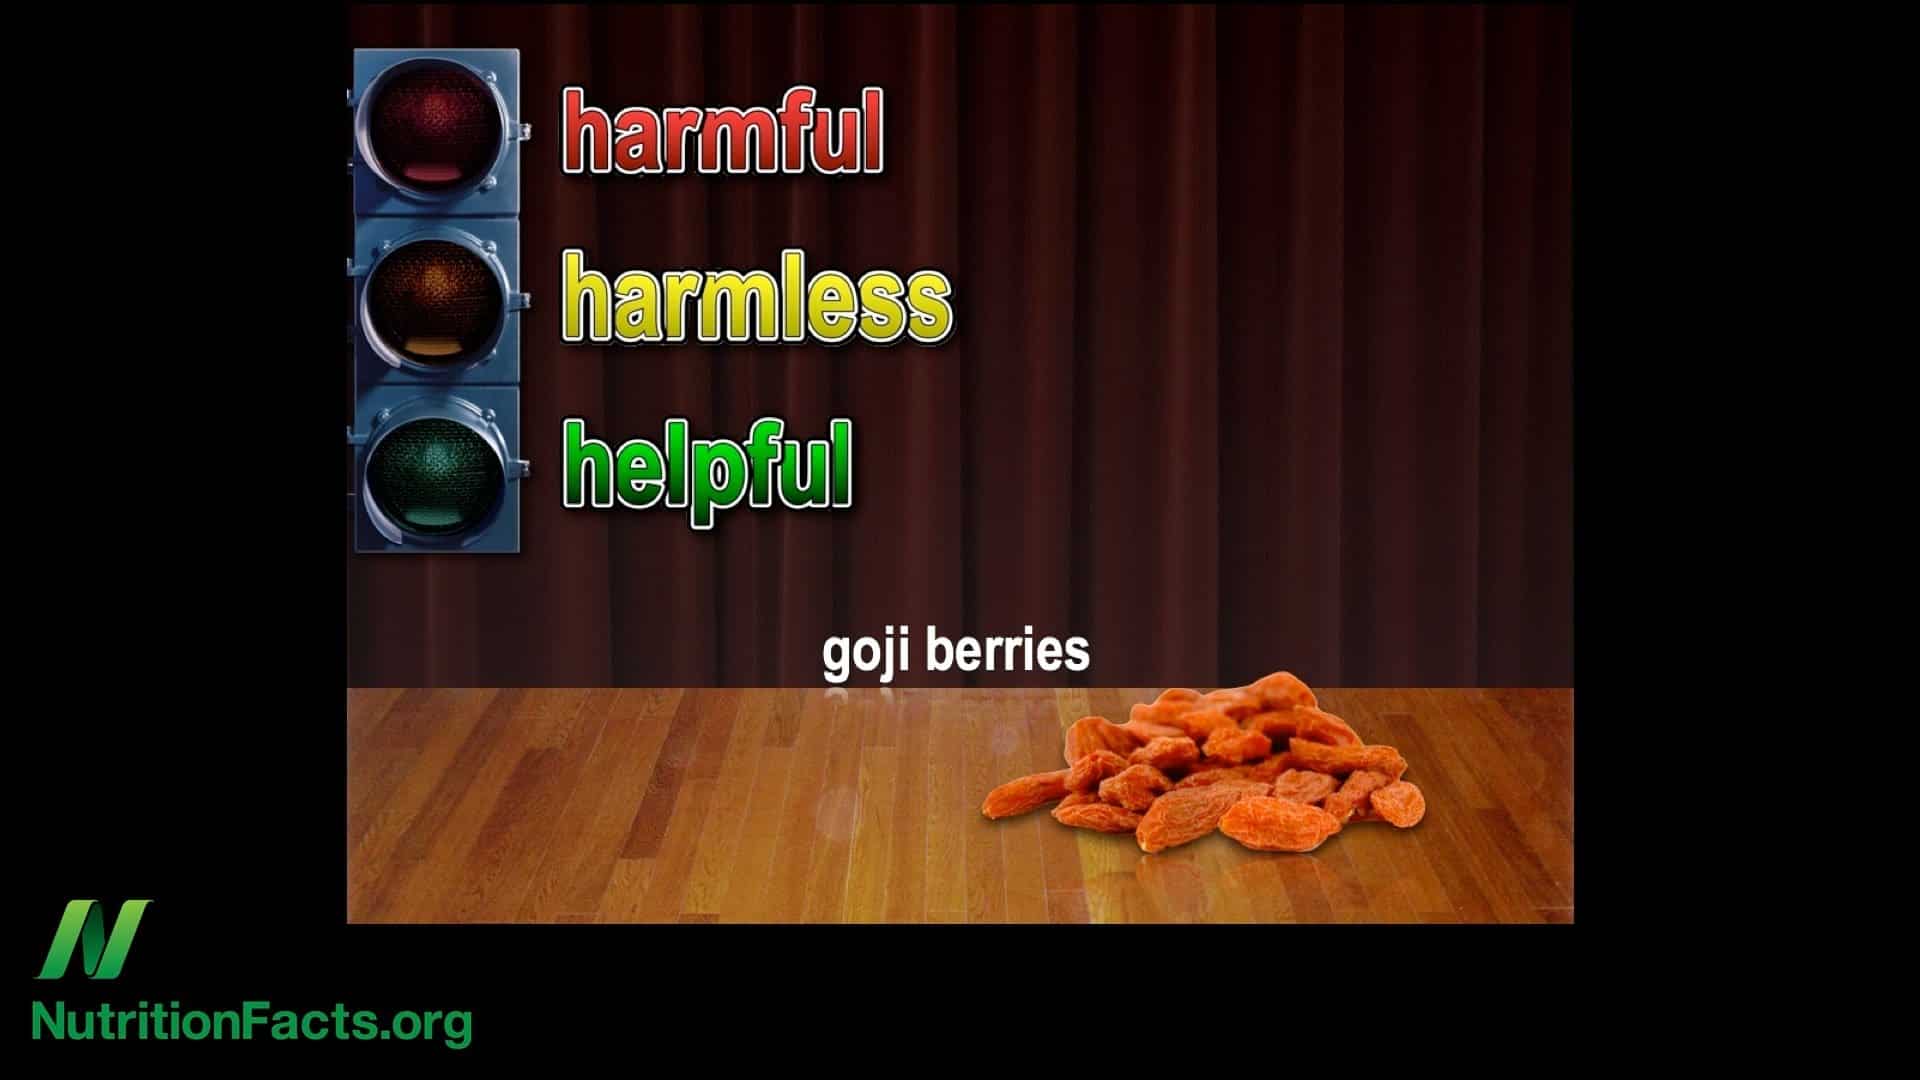 Are Goji Berries Good for You?